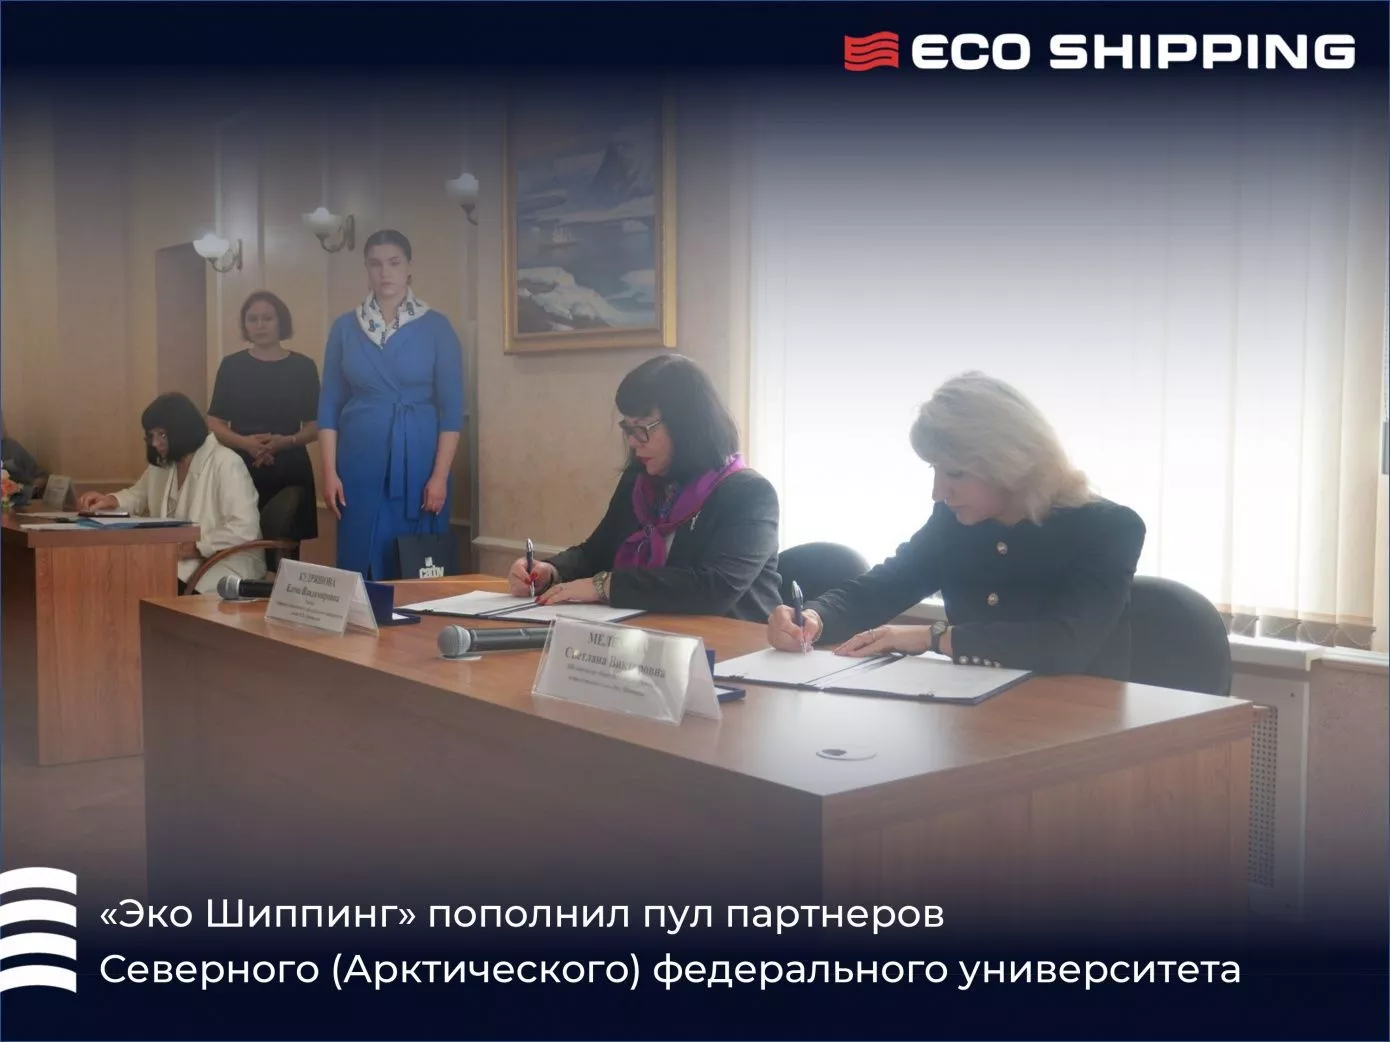 Eco Shipping has joined the pool of partners of the Northern (Arctic) Federal University